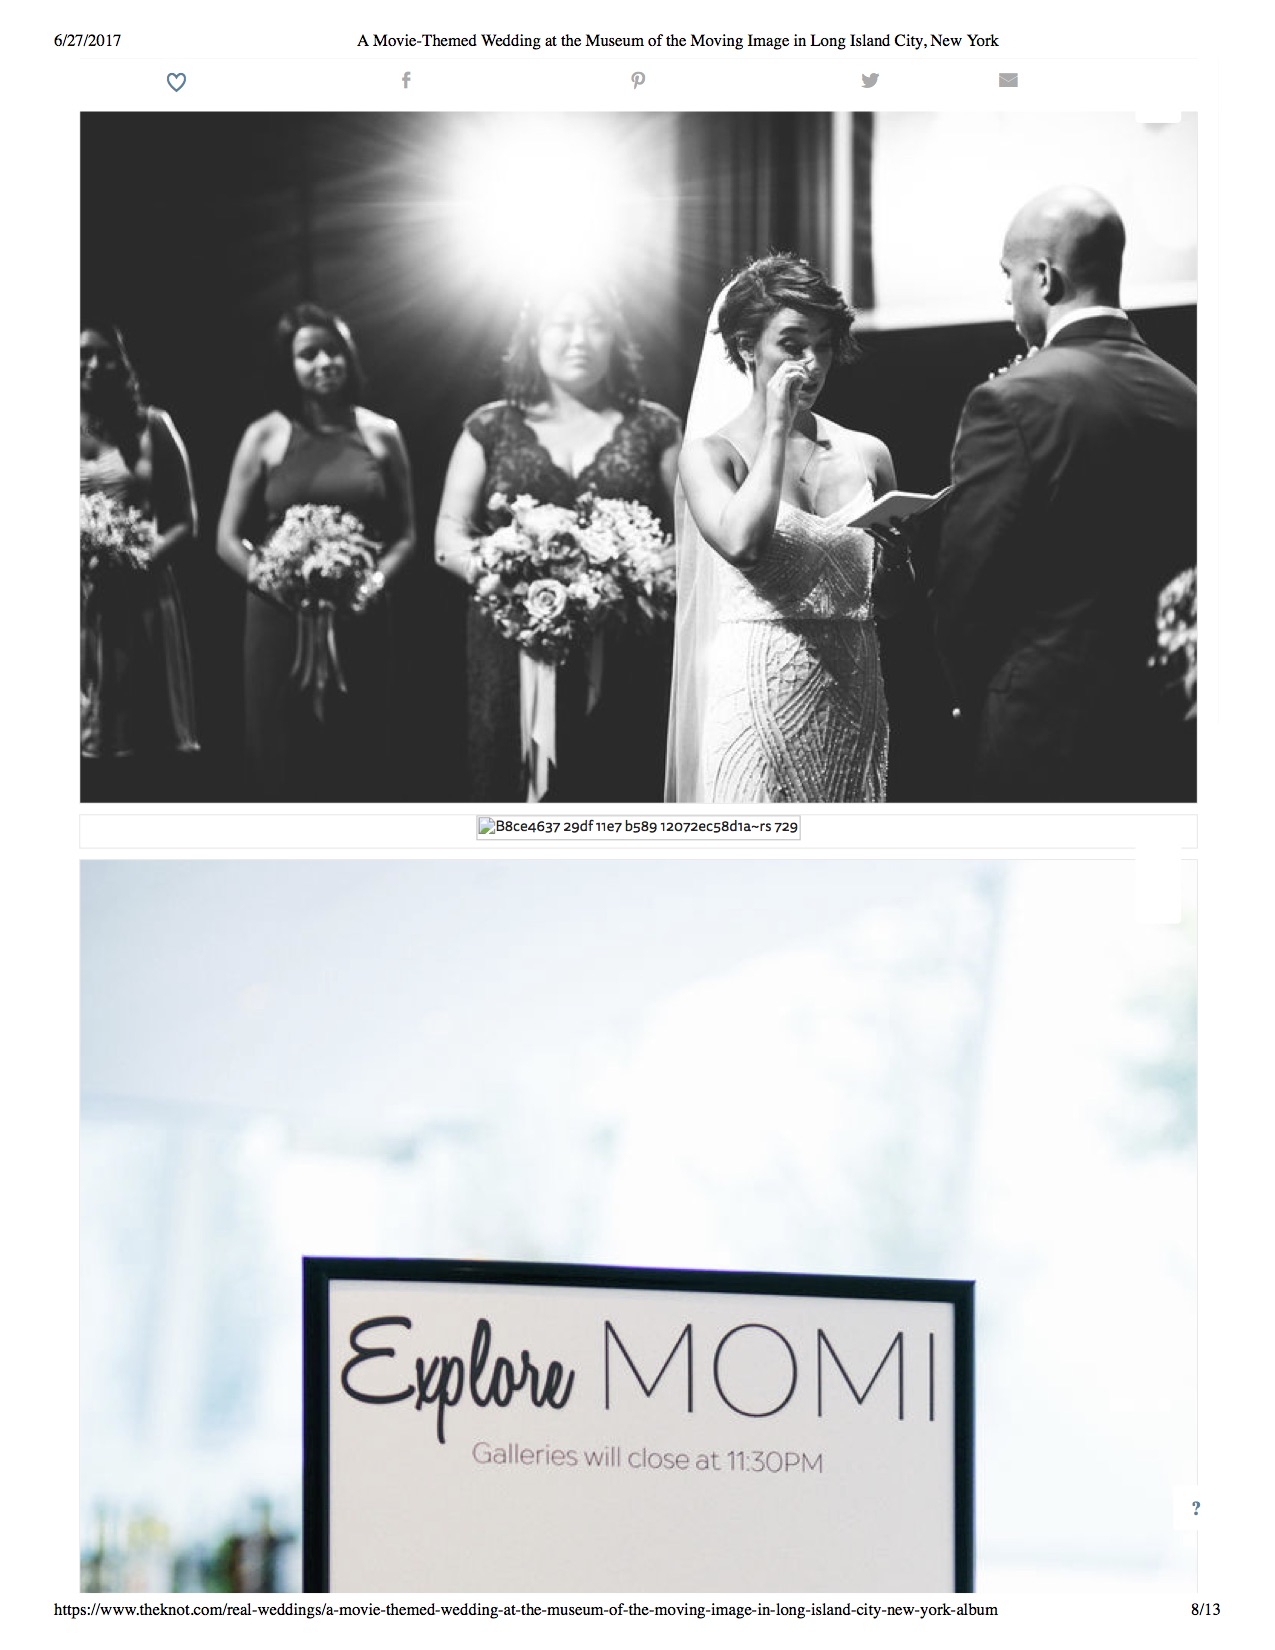 8A Movie-Themed Wedding at the Museum of the Moving Image in Long Island City, New York.jpg